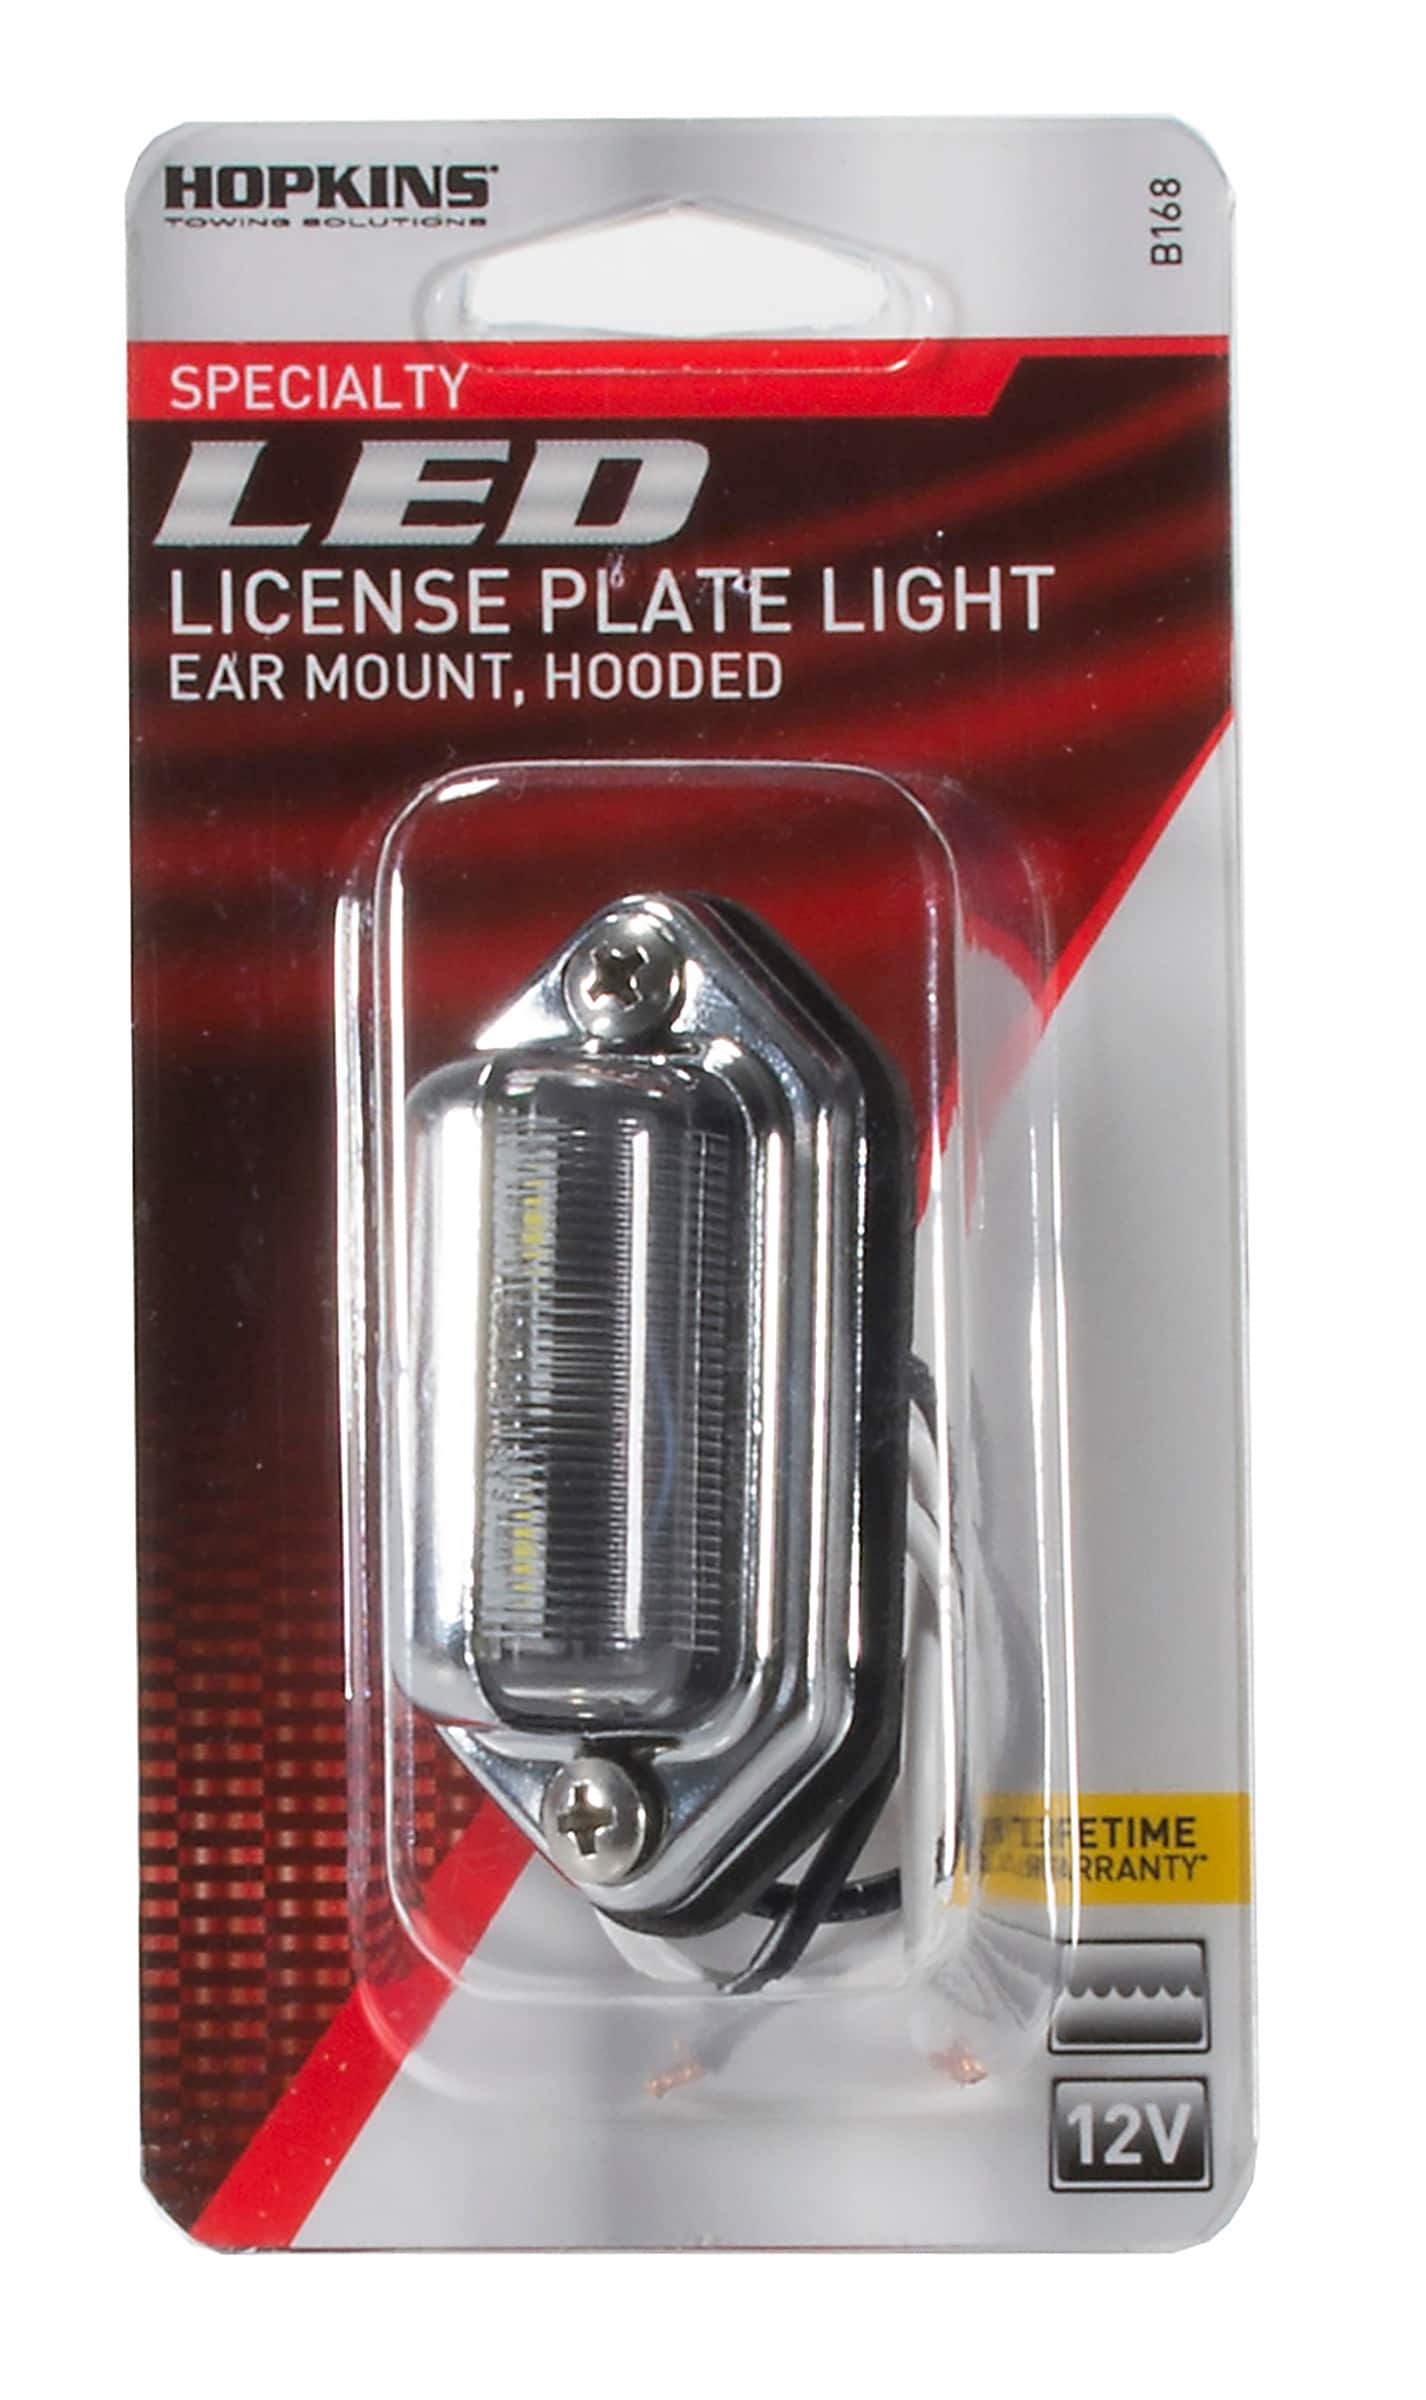 Hopkins Surface Mount Chrome Trailer Light for RVs and Mobile Homes -  Maintenance Free, Chrome Plated Steel Housing at